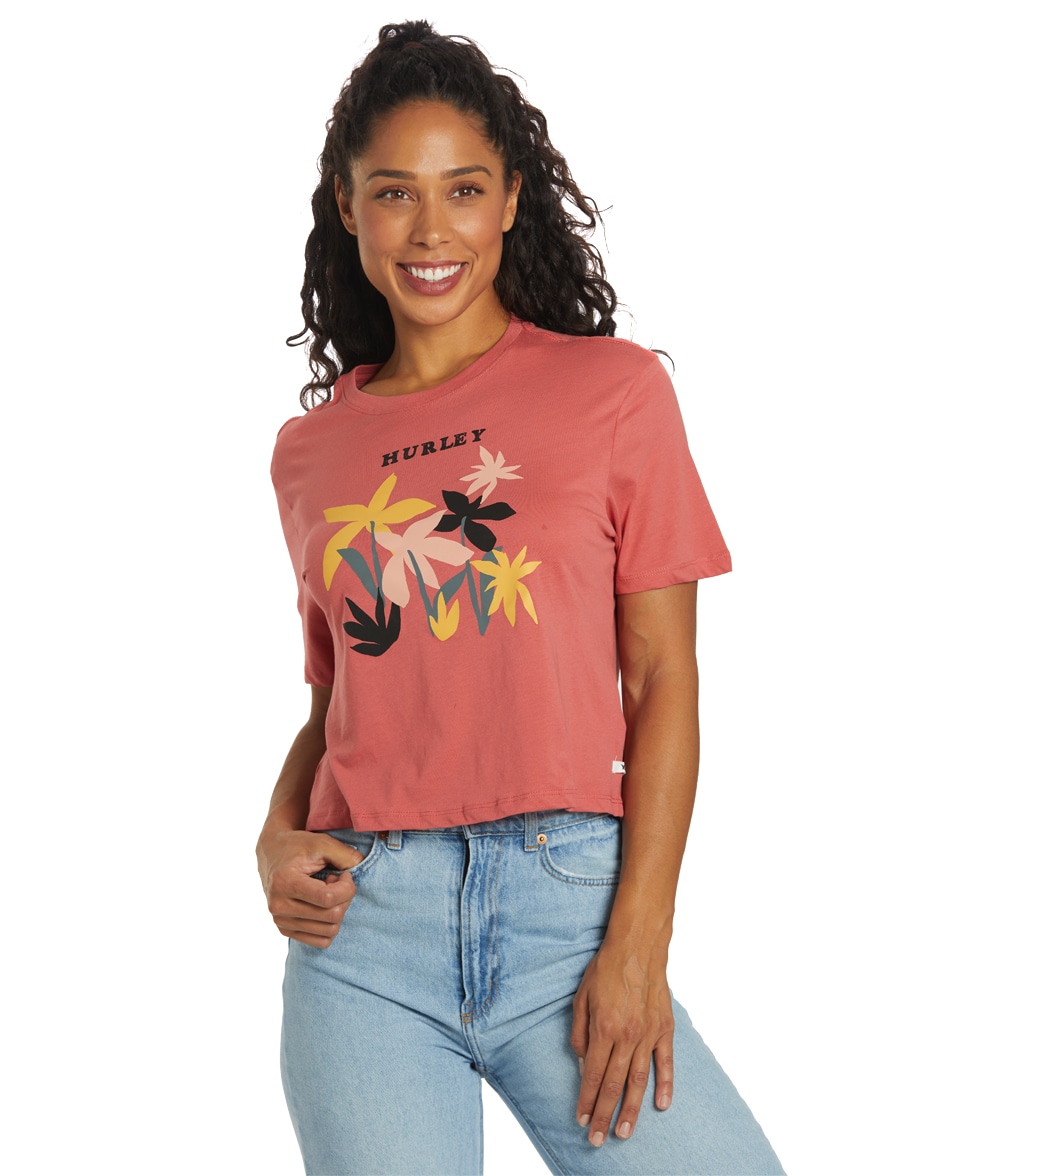 Hurley Women's Bloom Cropped Crew Tee Shirt - Mineral Red Large Cotton - Swimoutlet.com